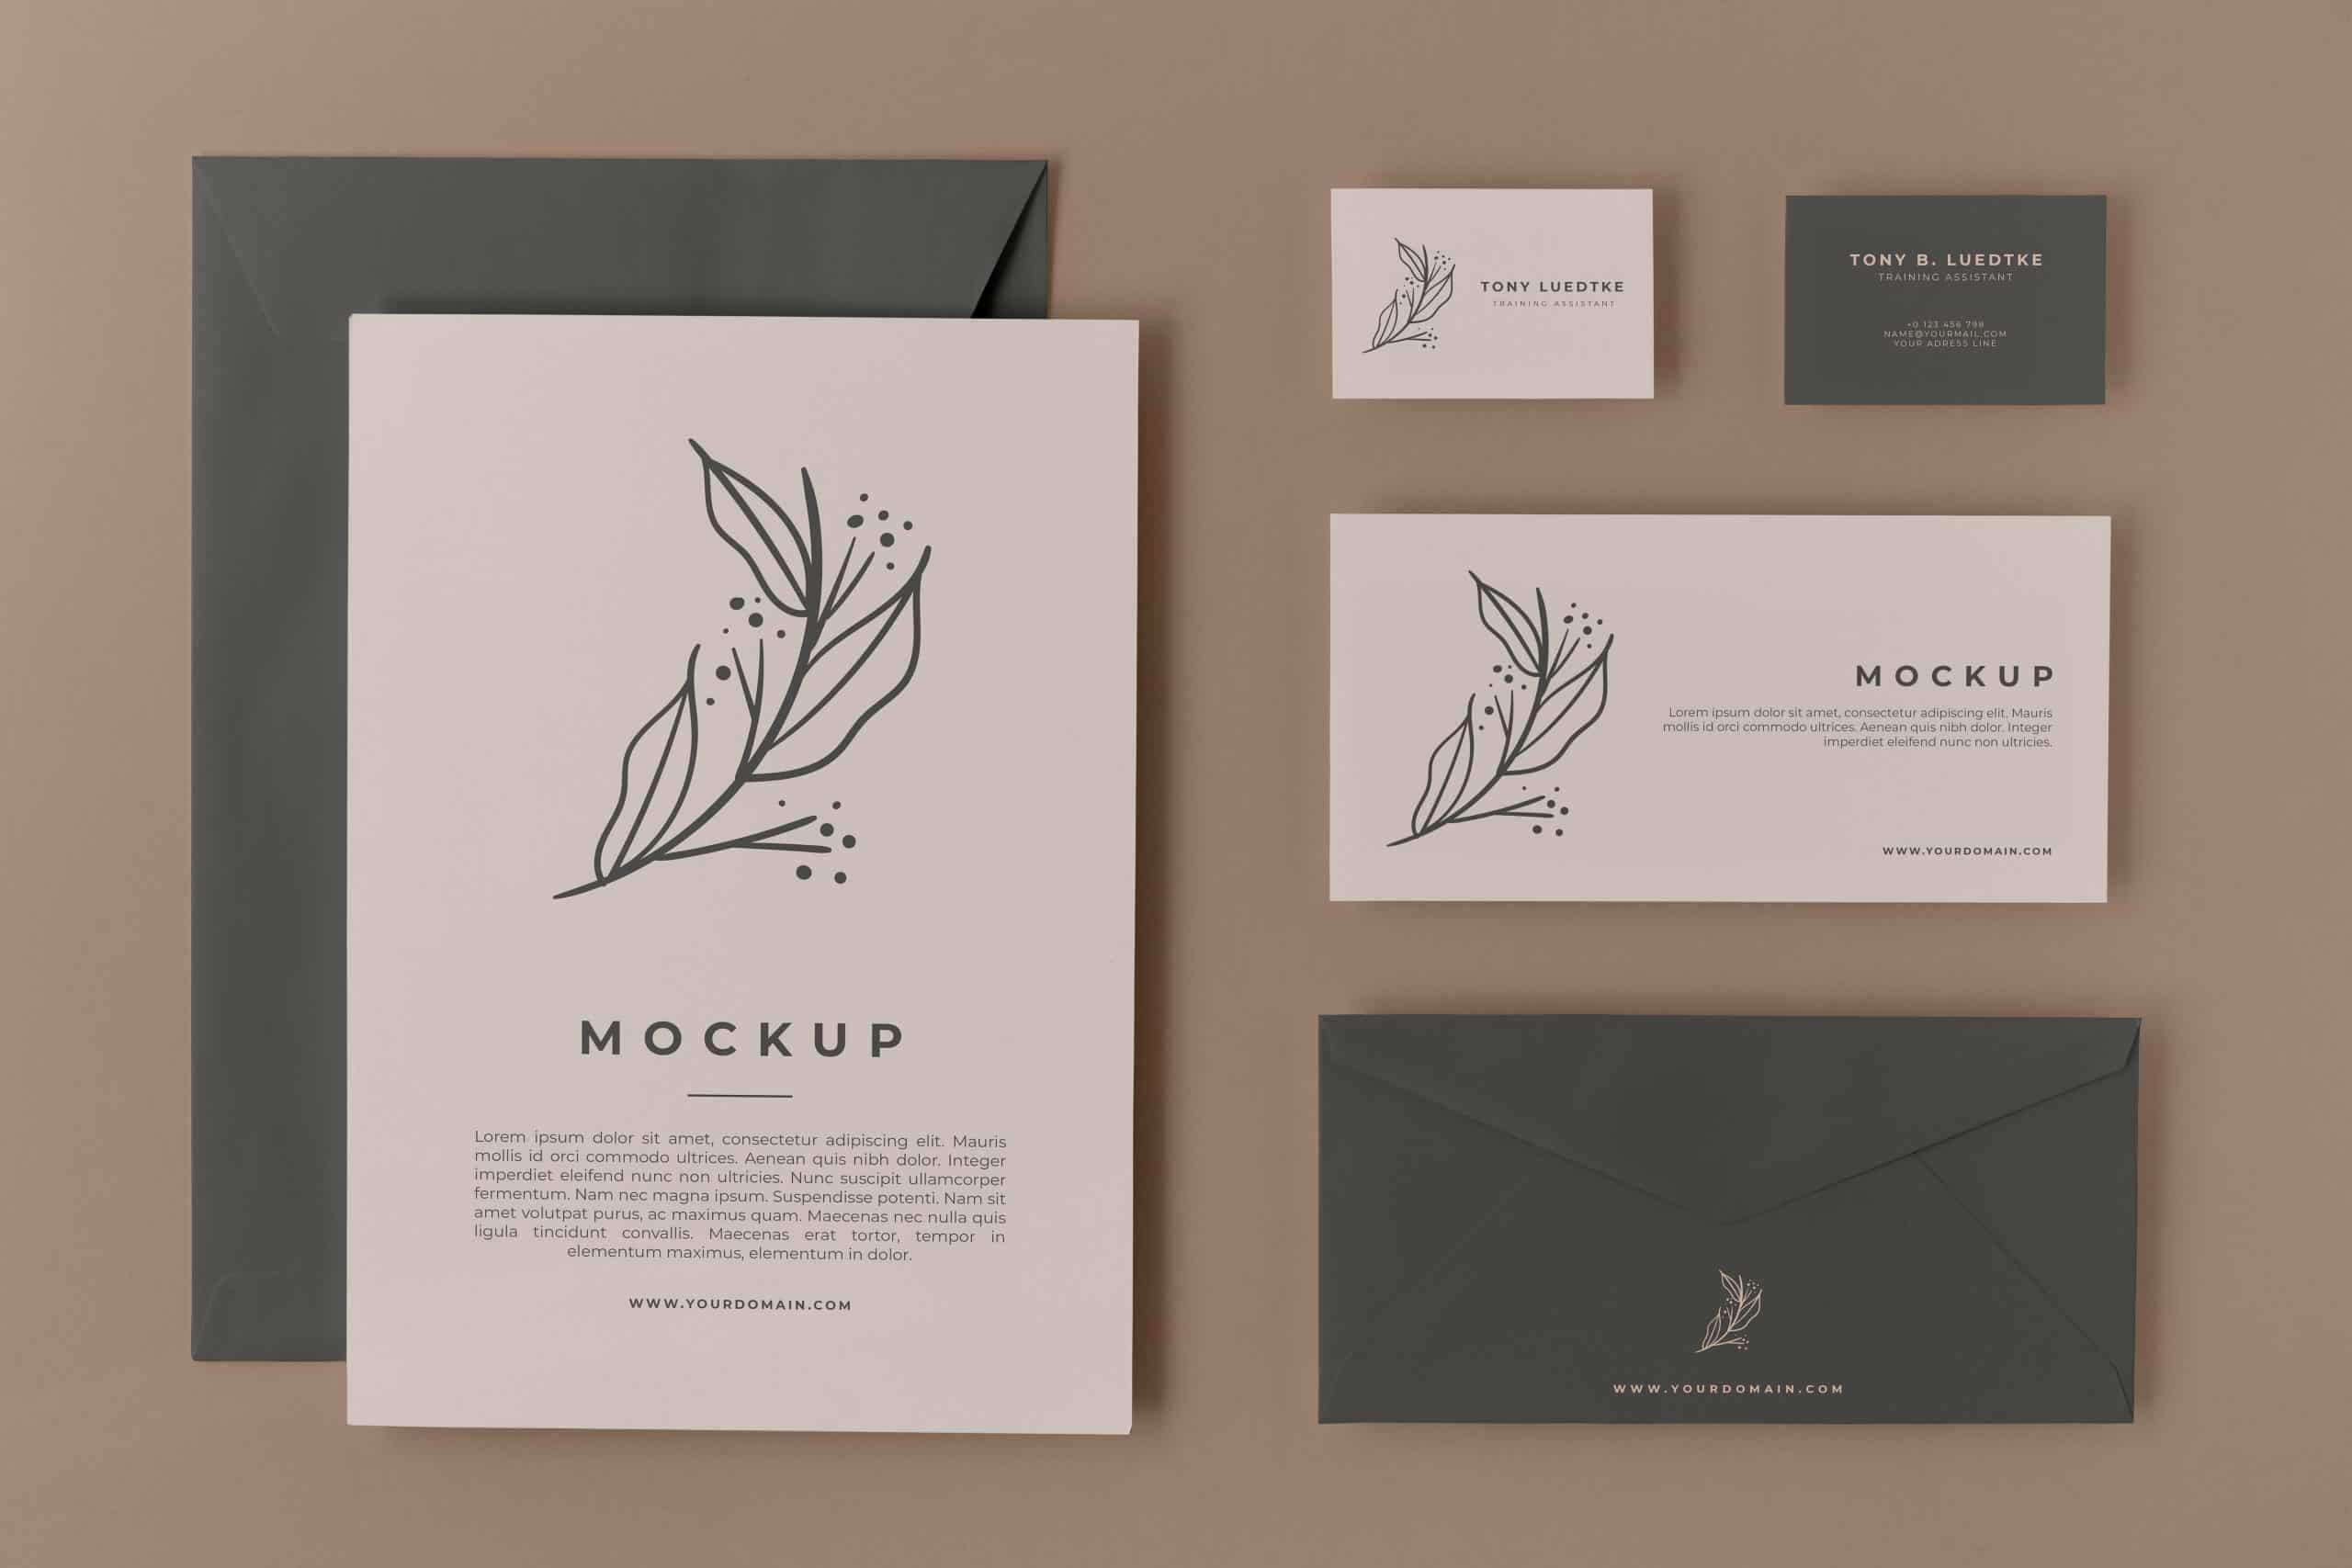 Unique stationery samples